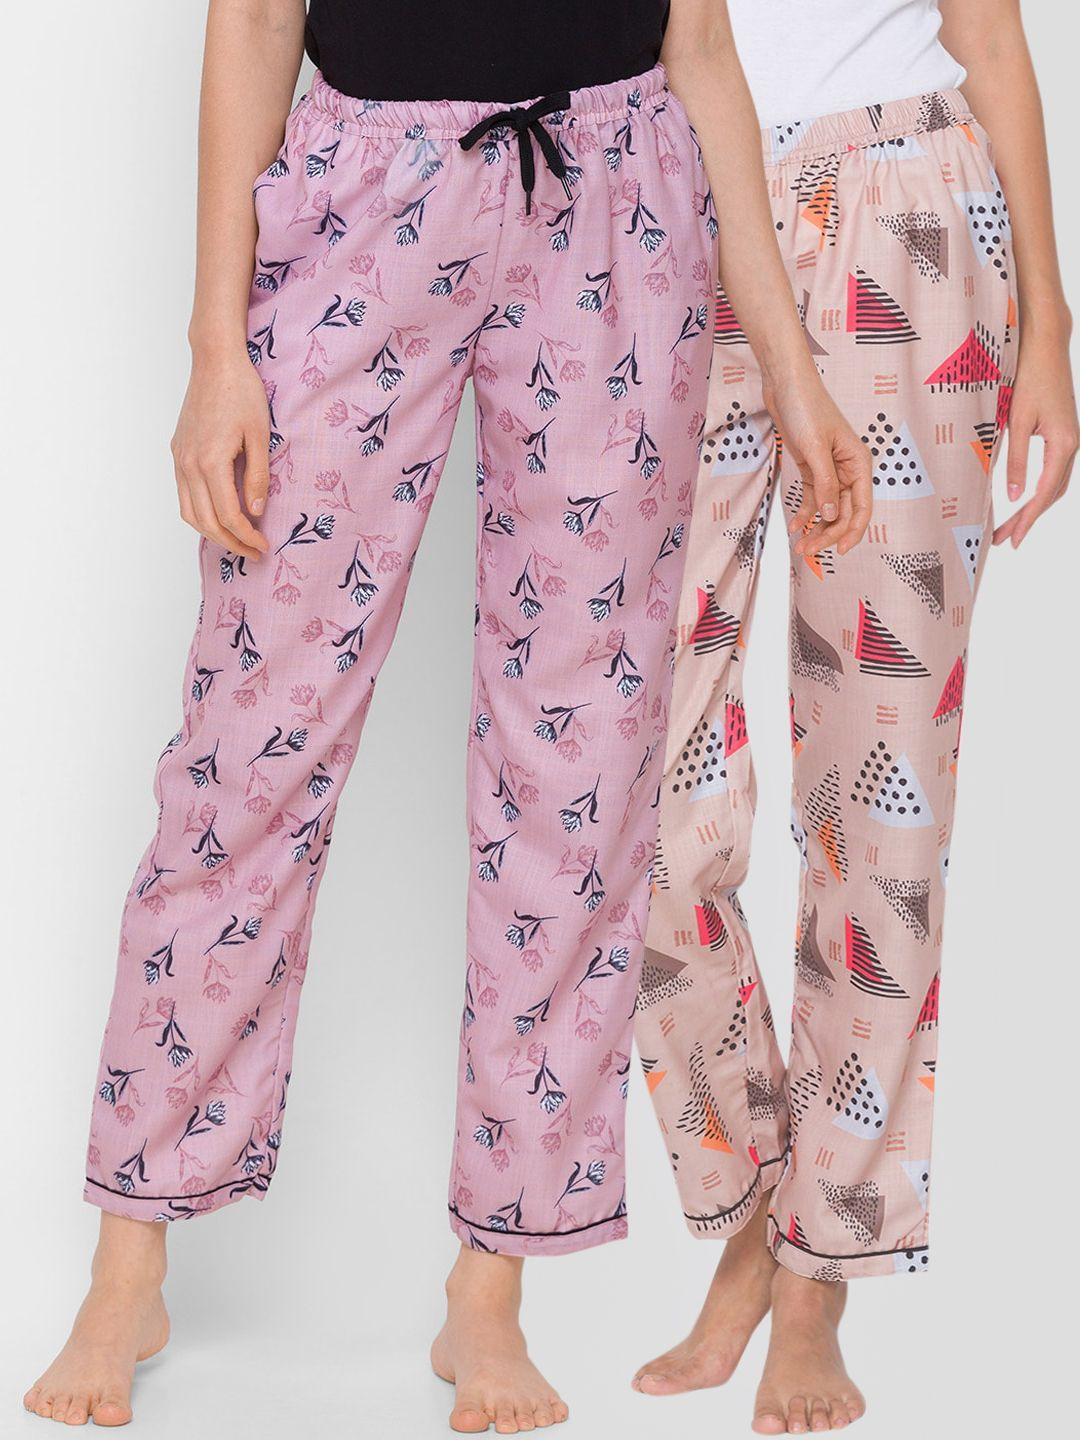 fashionrack pack of 2 beige & pink printed cotton lounge pants